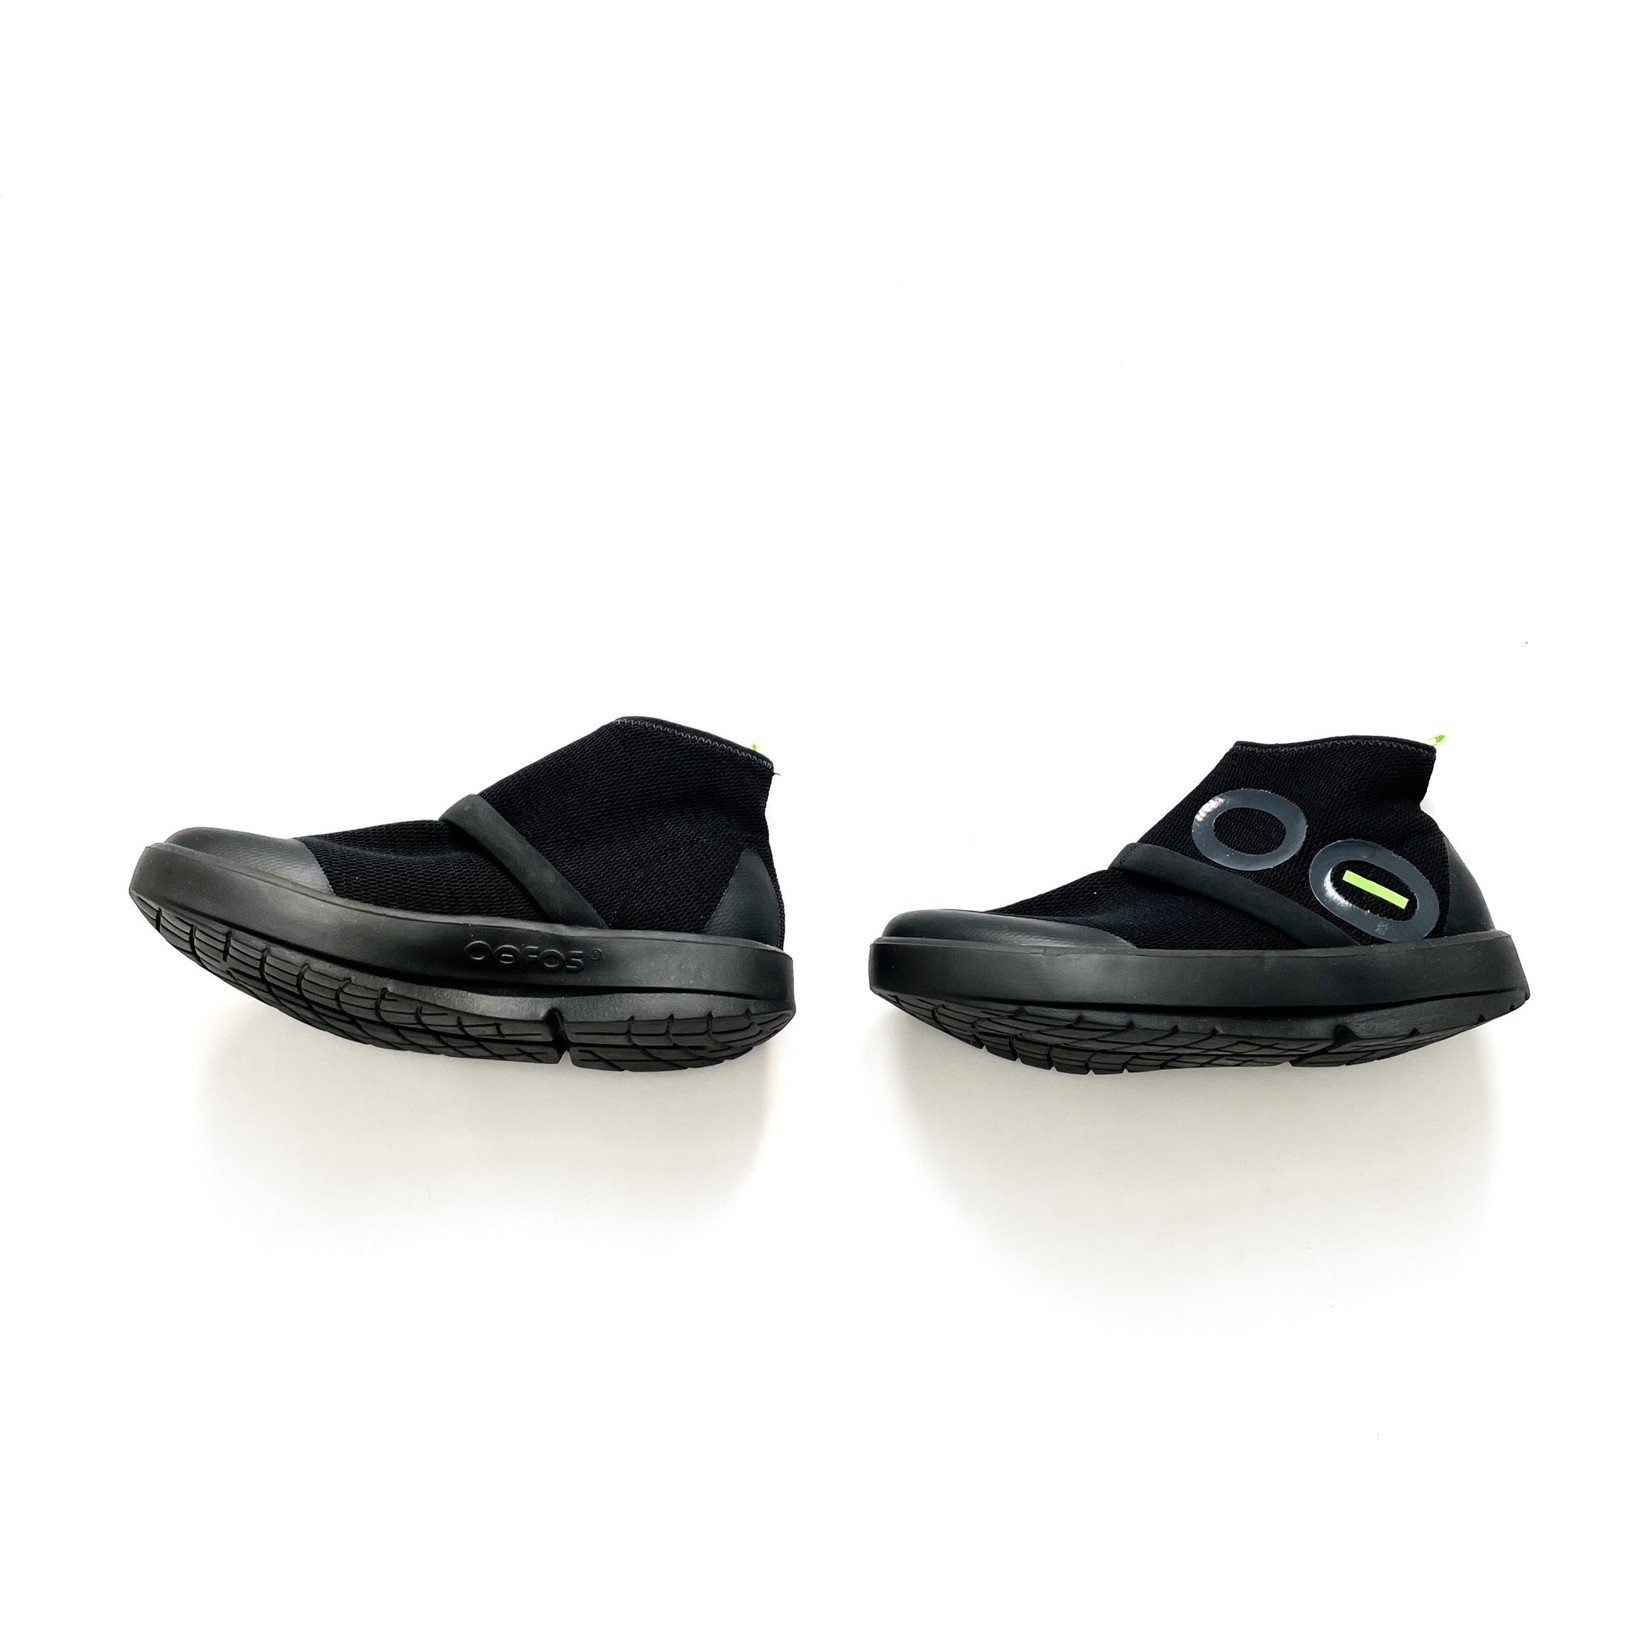 Oofos Oofos Recovery 'OOmg' Slip-On Runners - Size 8